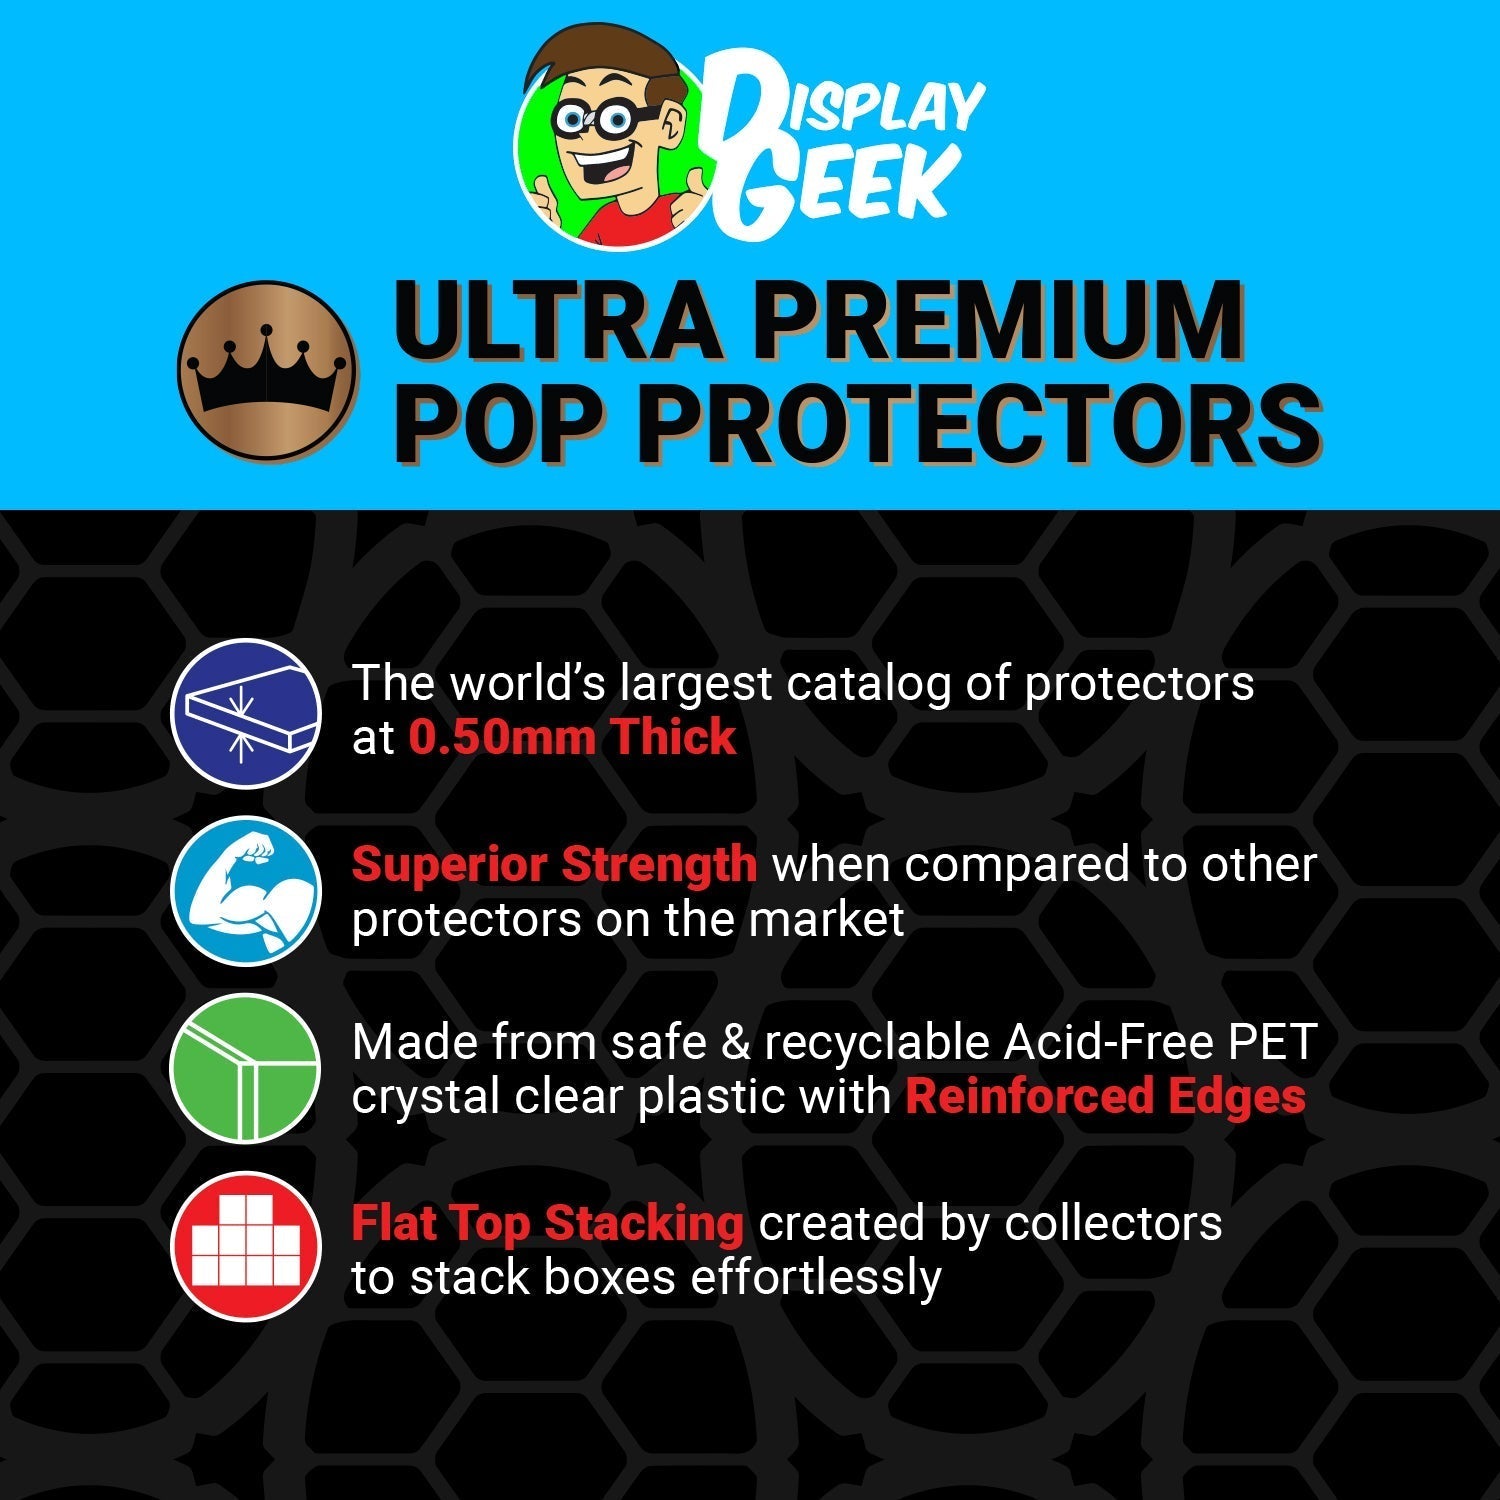 Pop Protector for 9 inch Giant Daryl Dixon Funko Pop - PPG Pop Protector Guide Search Created by Display Geek